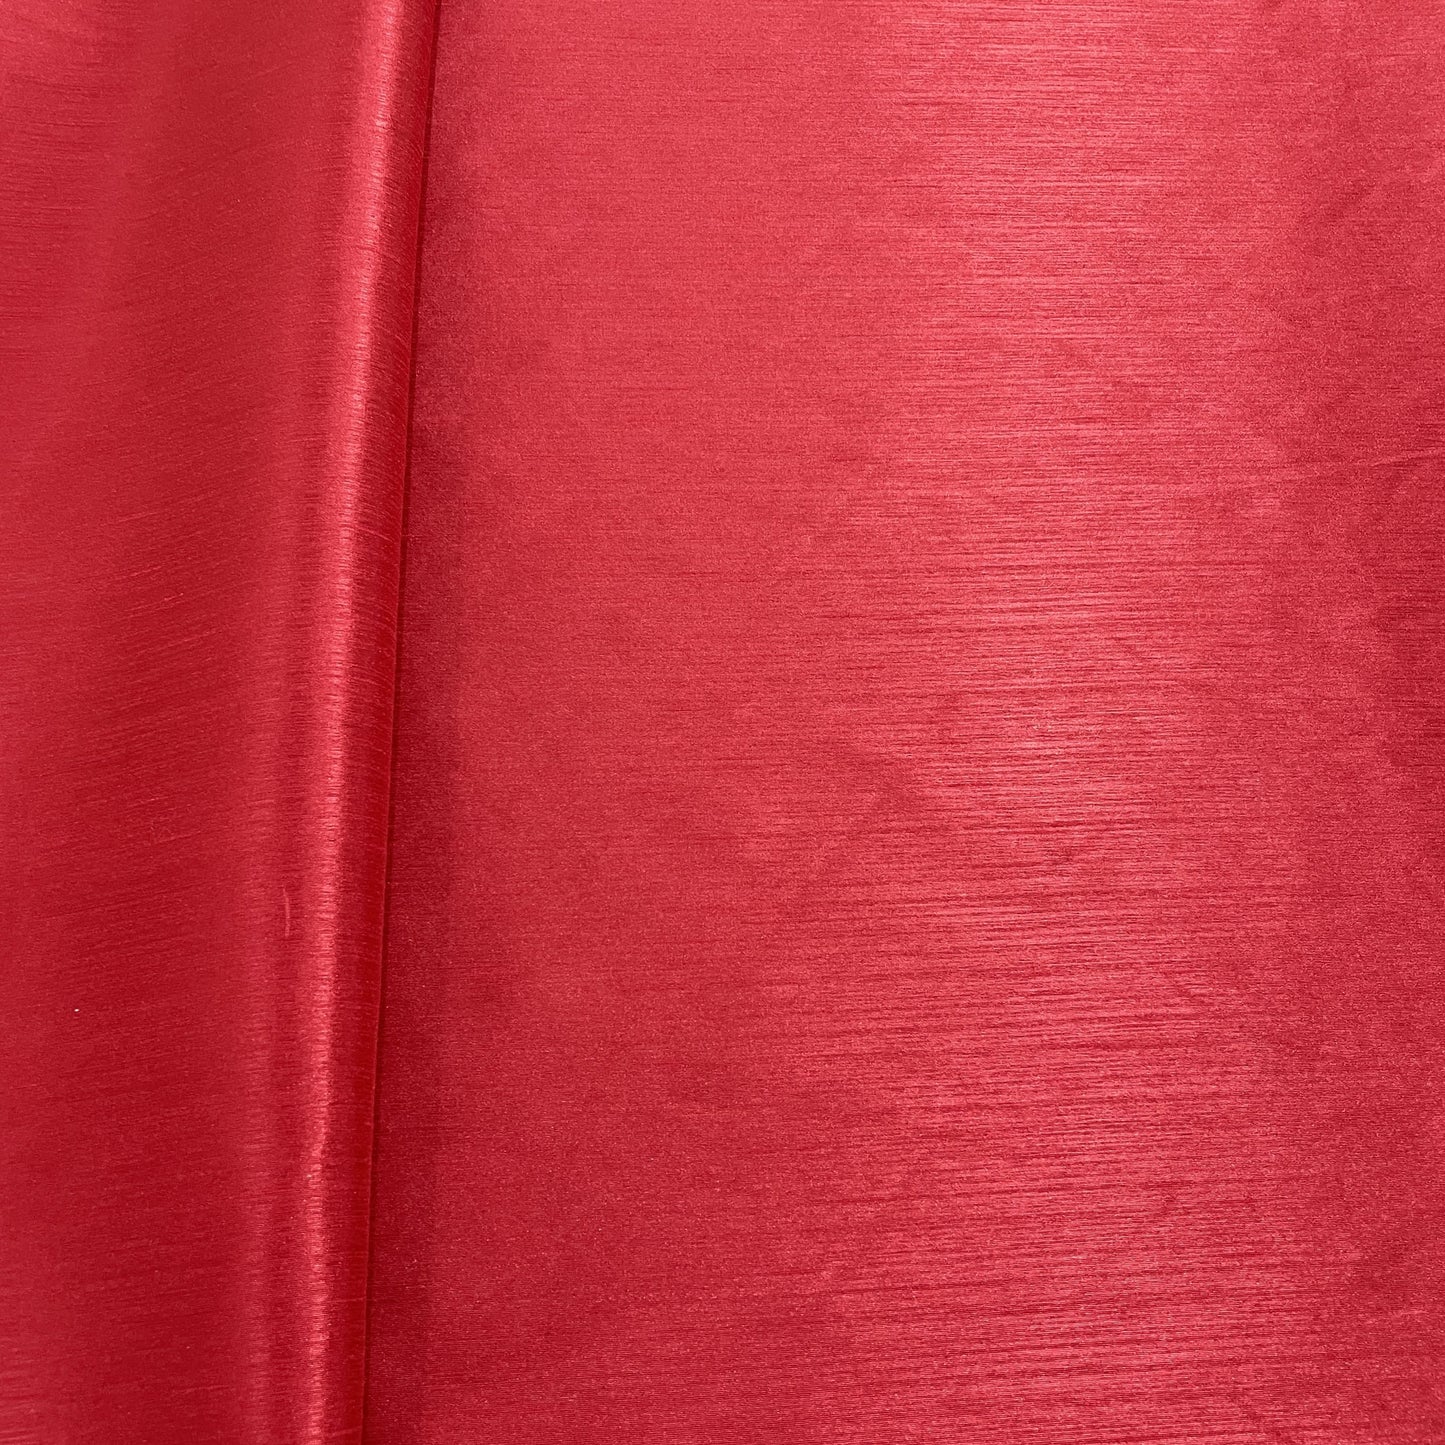 Red Solid Satin Fabric